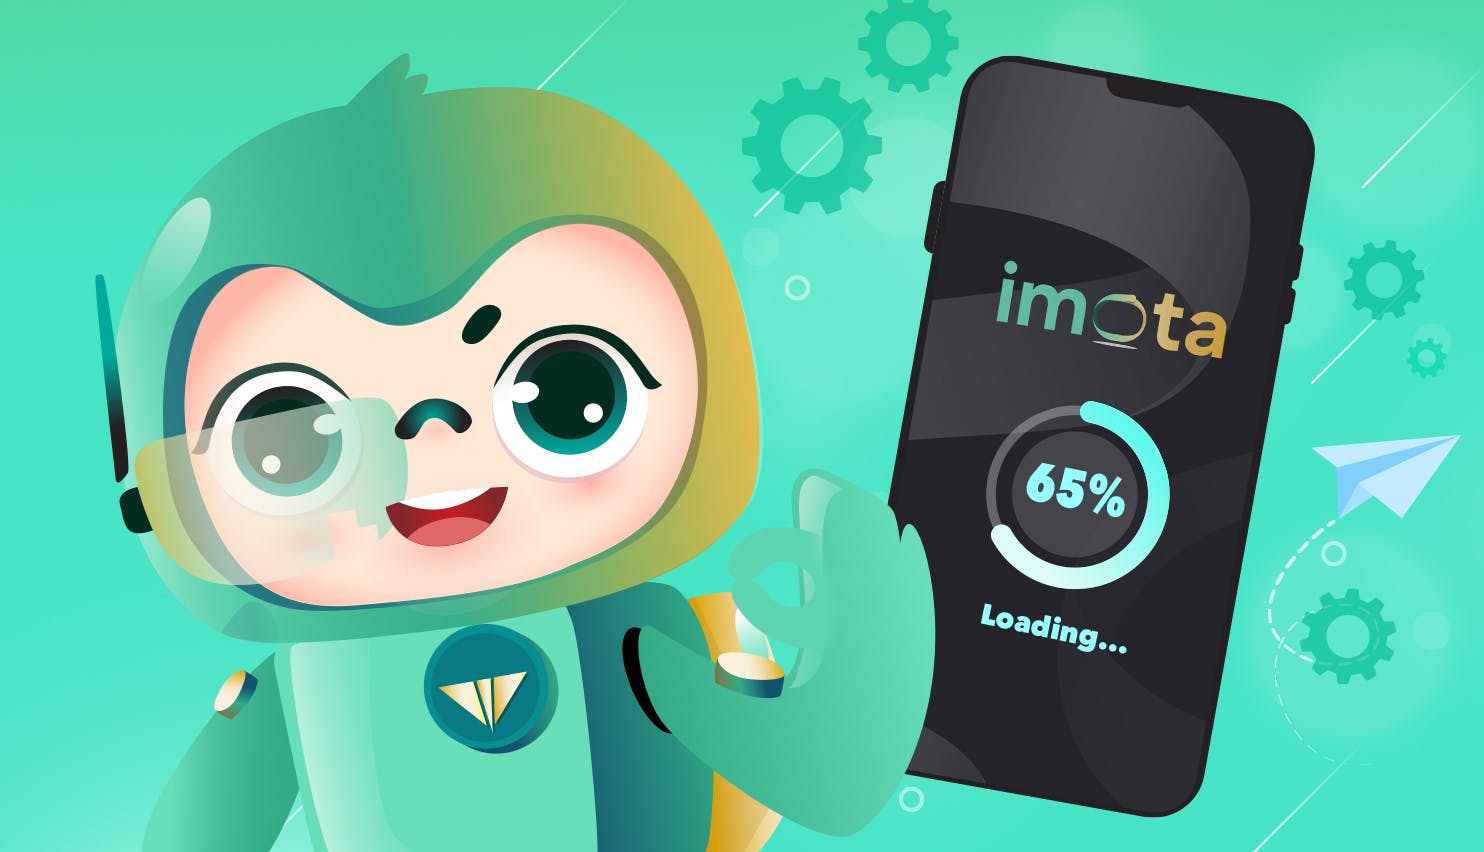 Imota Update Game Features - Don't Miss Out!